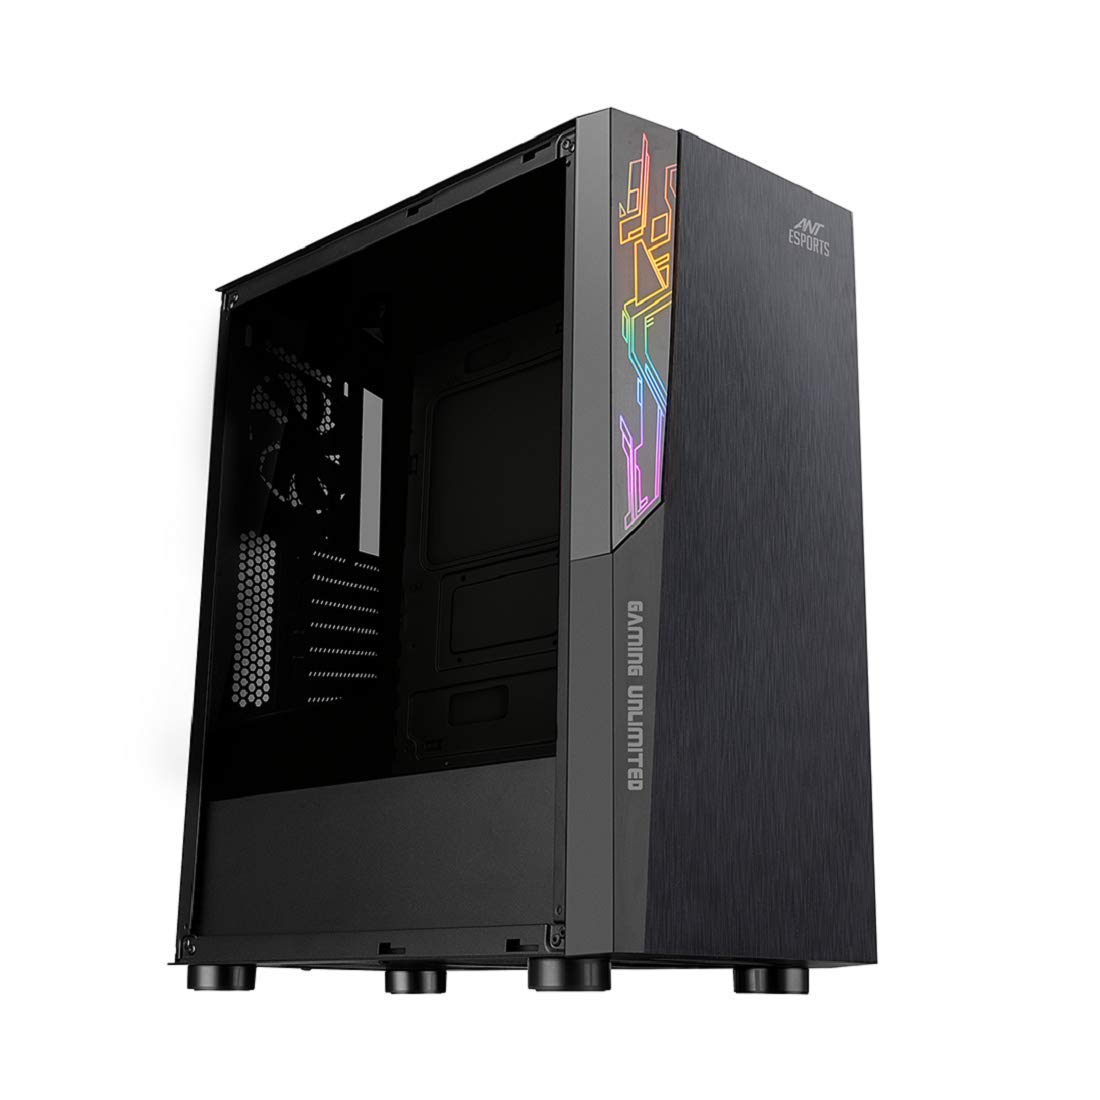 Ant Esports ICE-120AG Mid Tower Computer Case I Gaming Cabinet Supports ATX, Micro-ATX, Mini-ITX Motherboard with 1 x 120 mm Rear Fan Preinstalled - Black-Cabinets-antesports-computerspace